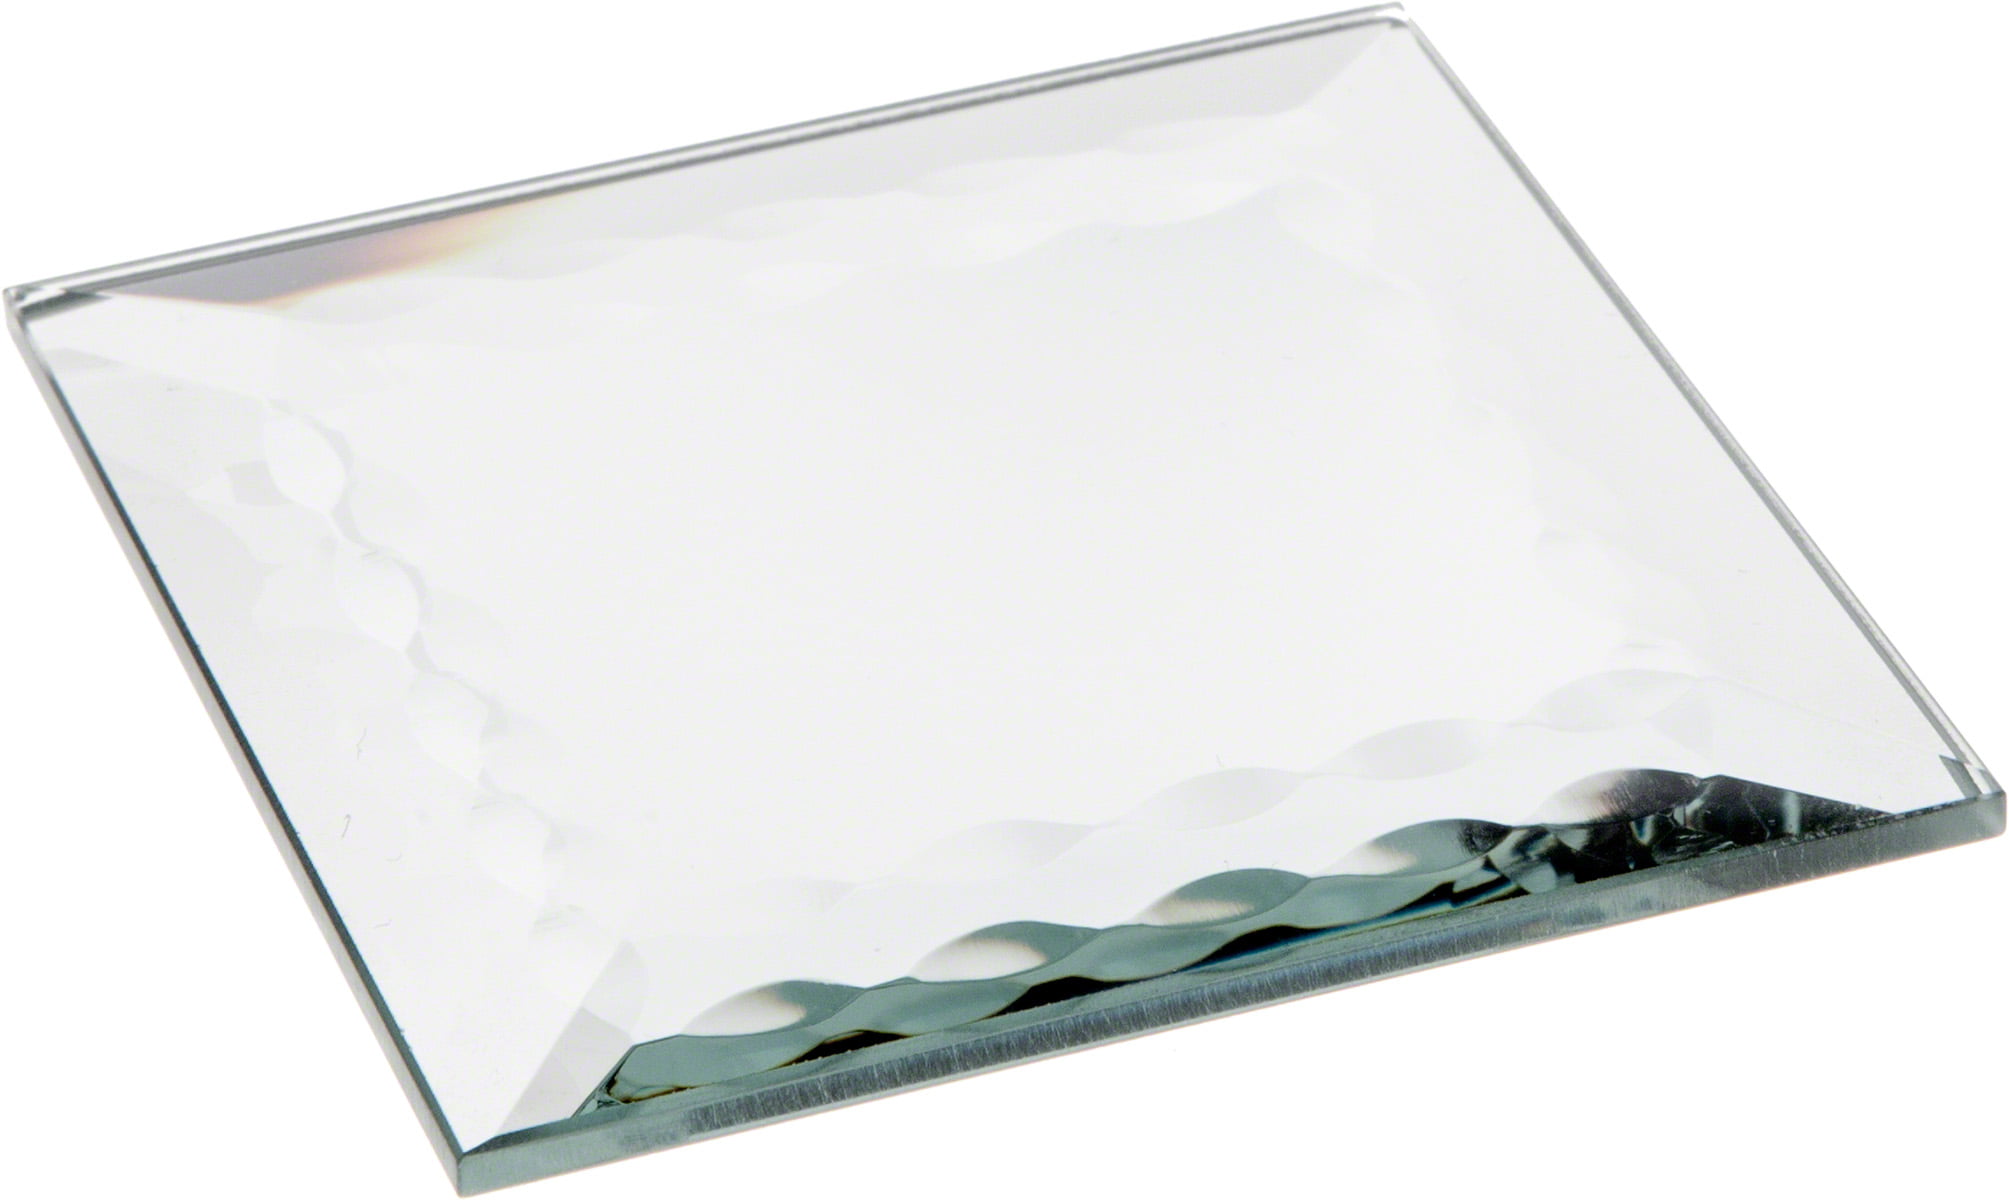 Plymor Square 5mm Beveled Glass Mirror Pack of 2 14 inch x 14 inch 